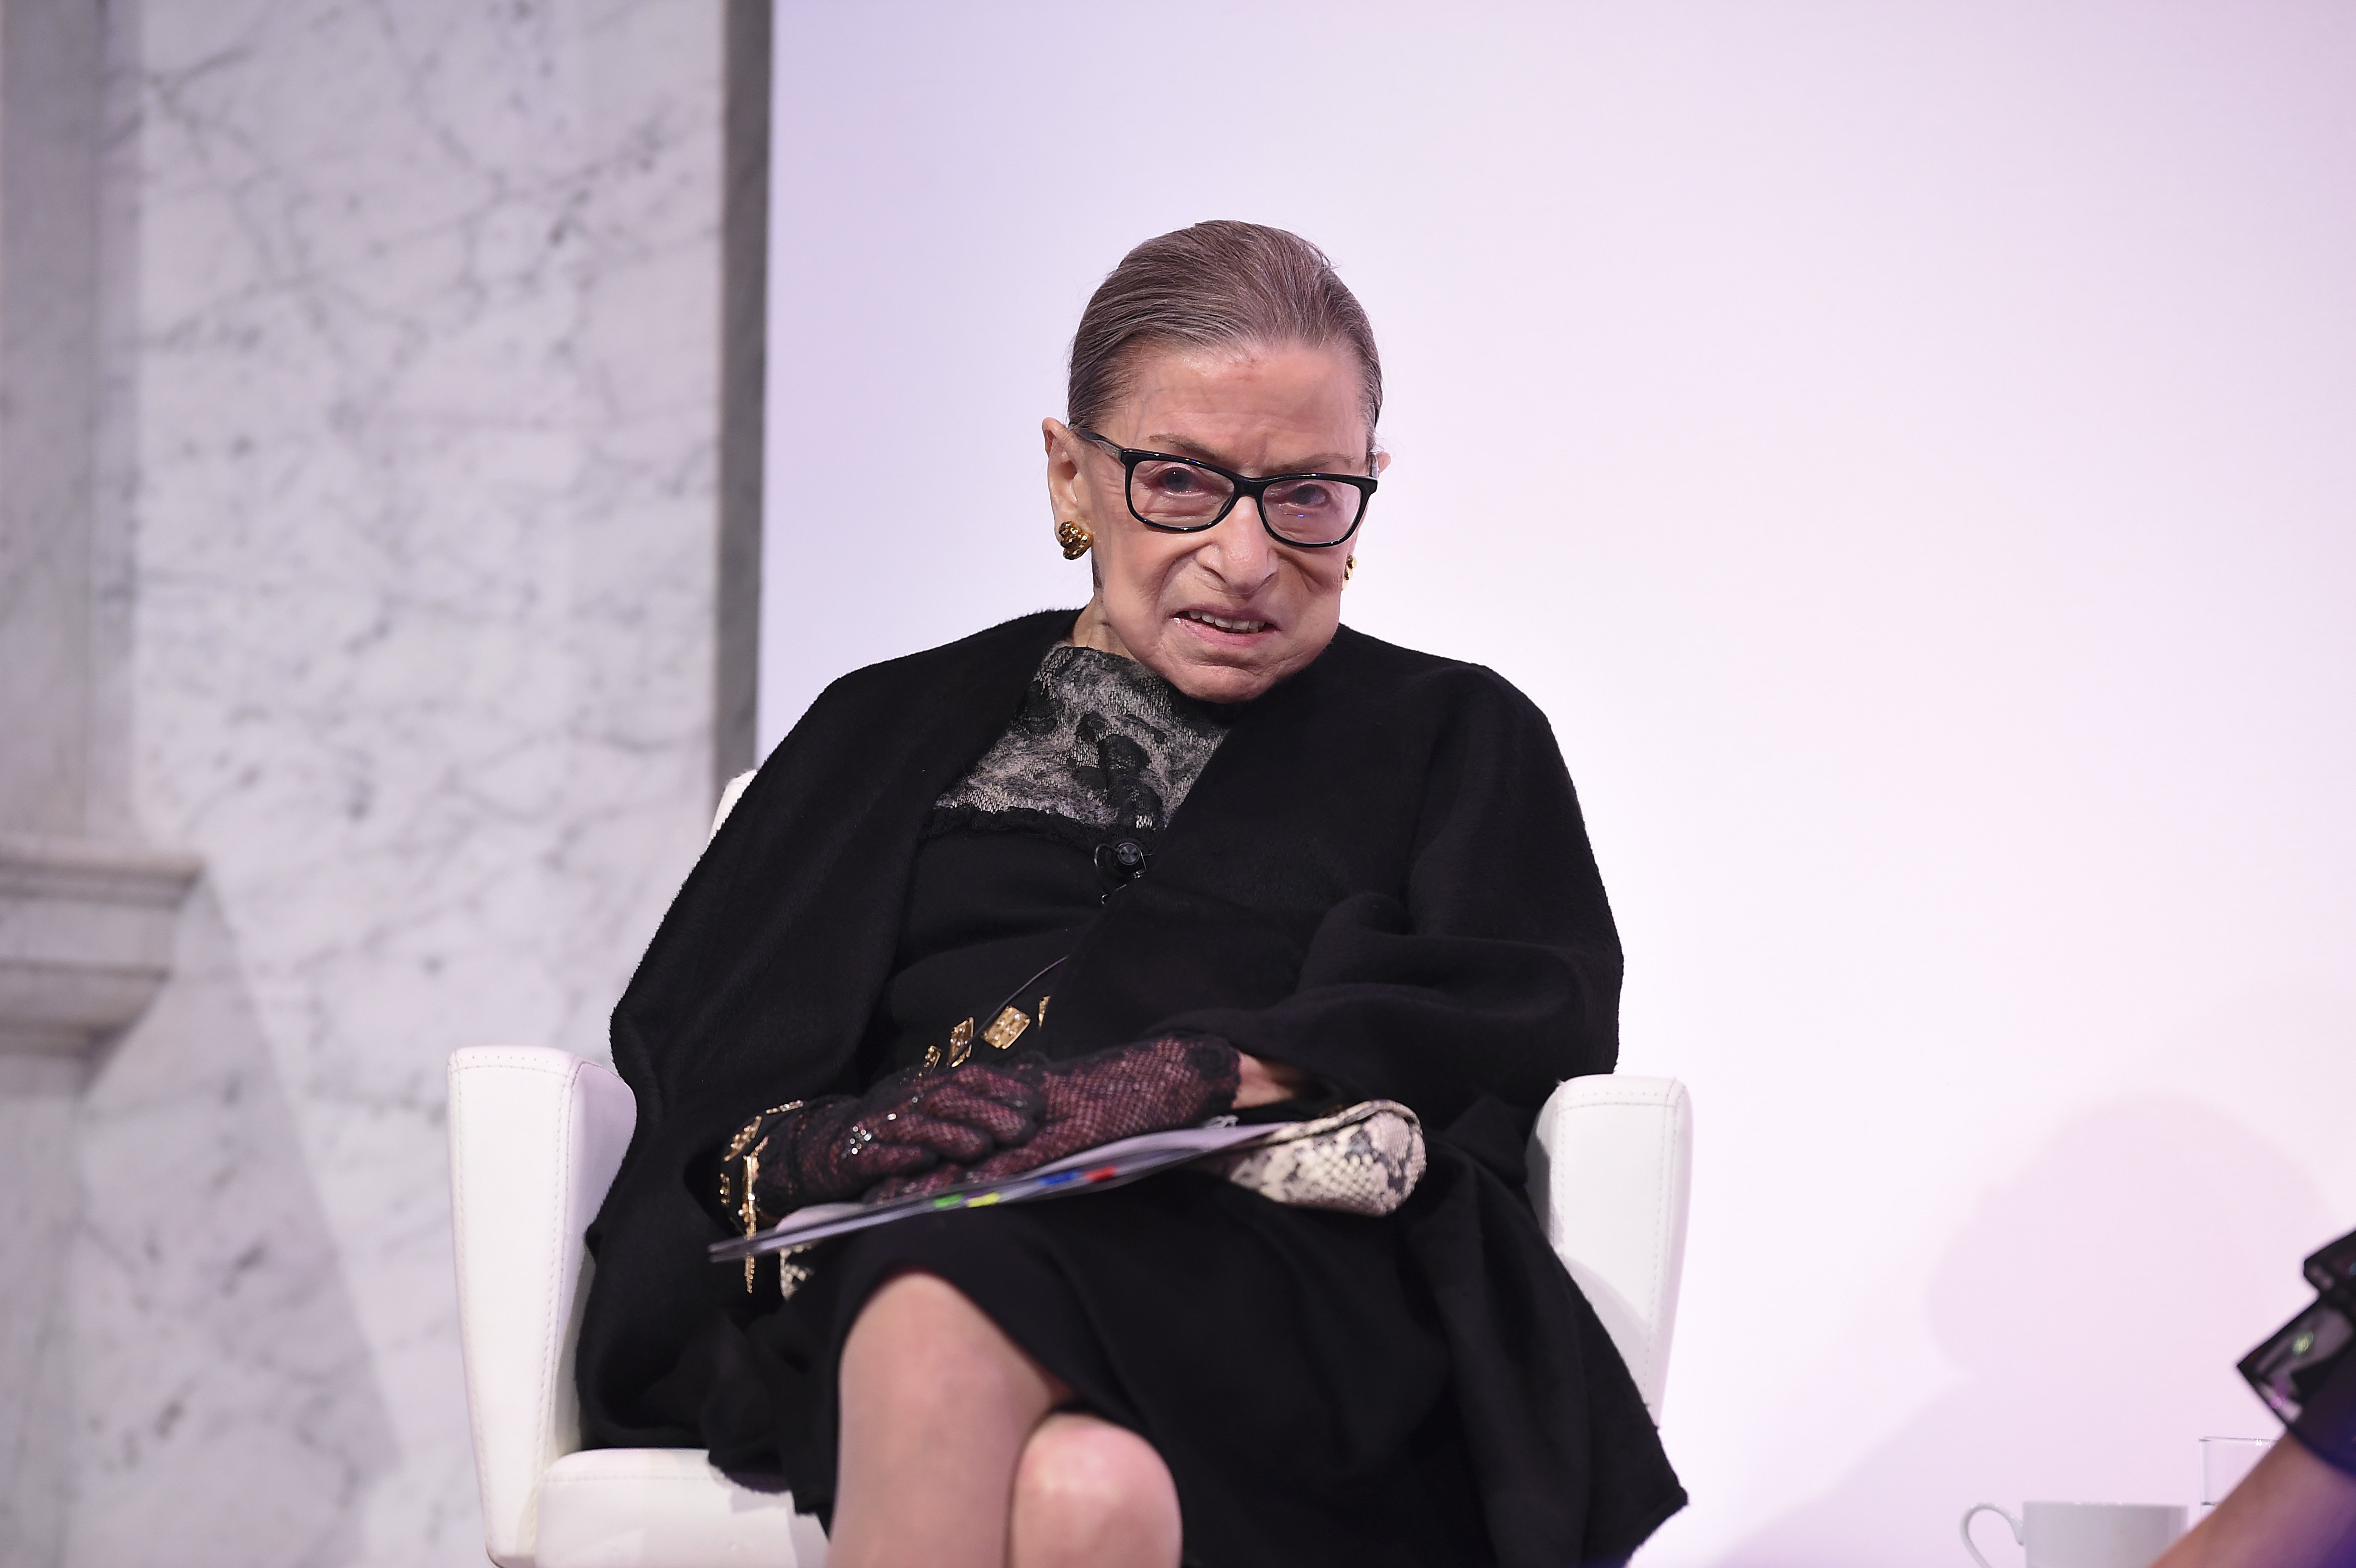 Justice Ruth Bader Ginsburg at the 2020 DVF Awards on February 19, 2020 in Washington, DC | Photo: Getty Images